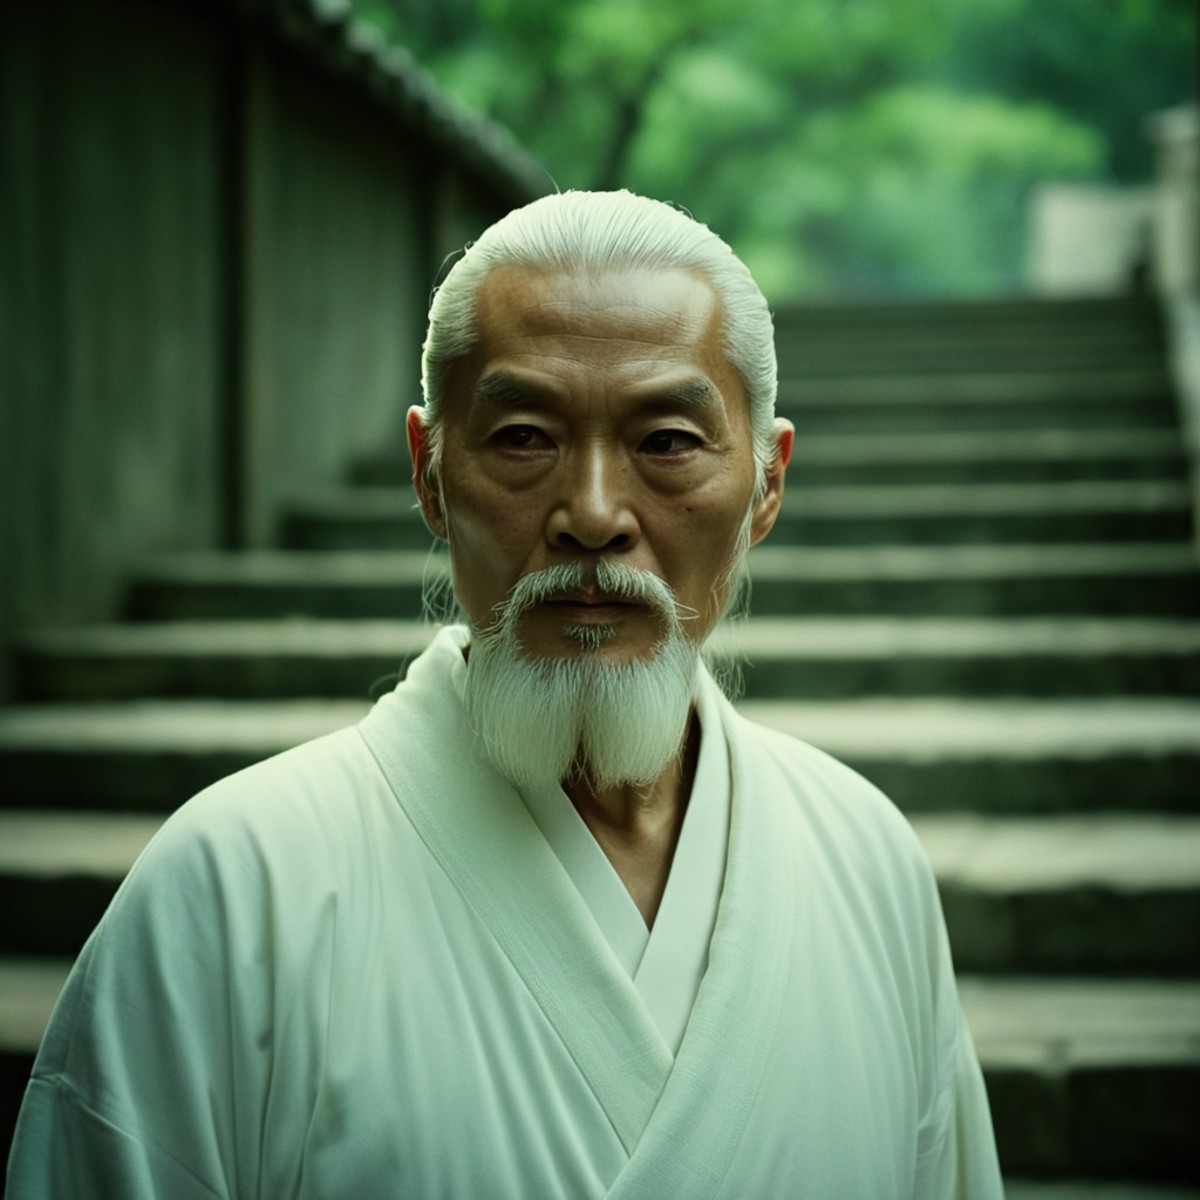 cinematic film still of  <lora:Kill Bill style:1>
Cinematic film image of Pai Mei a man with a white beard and a white rob...